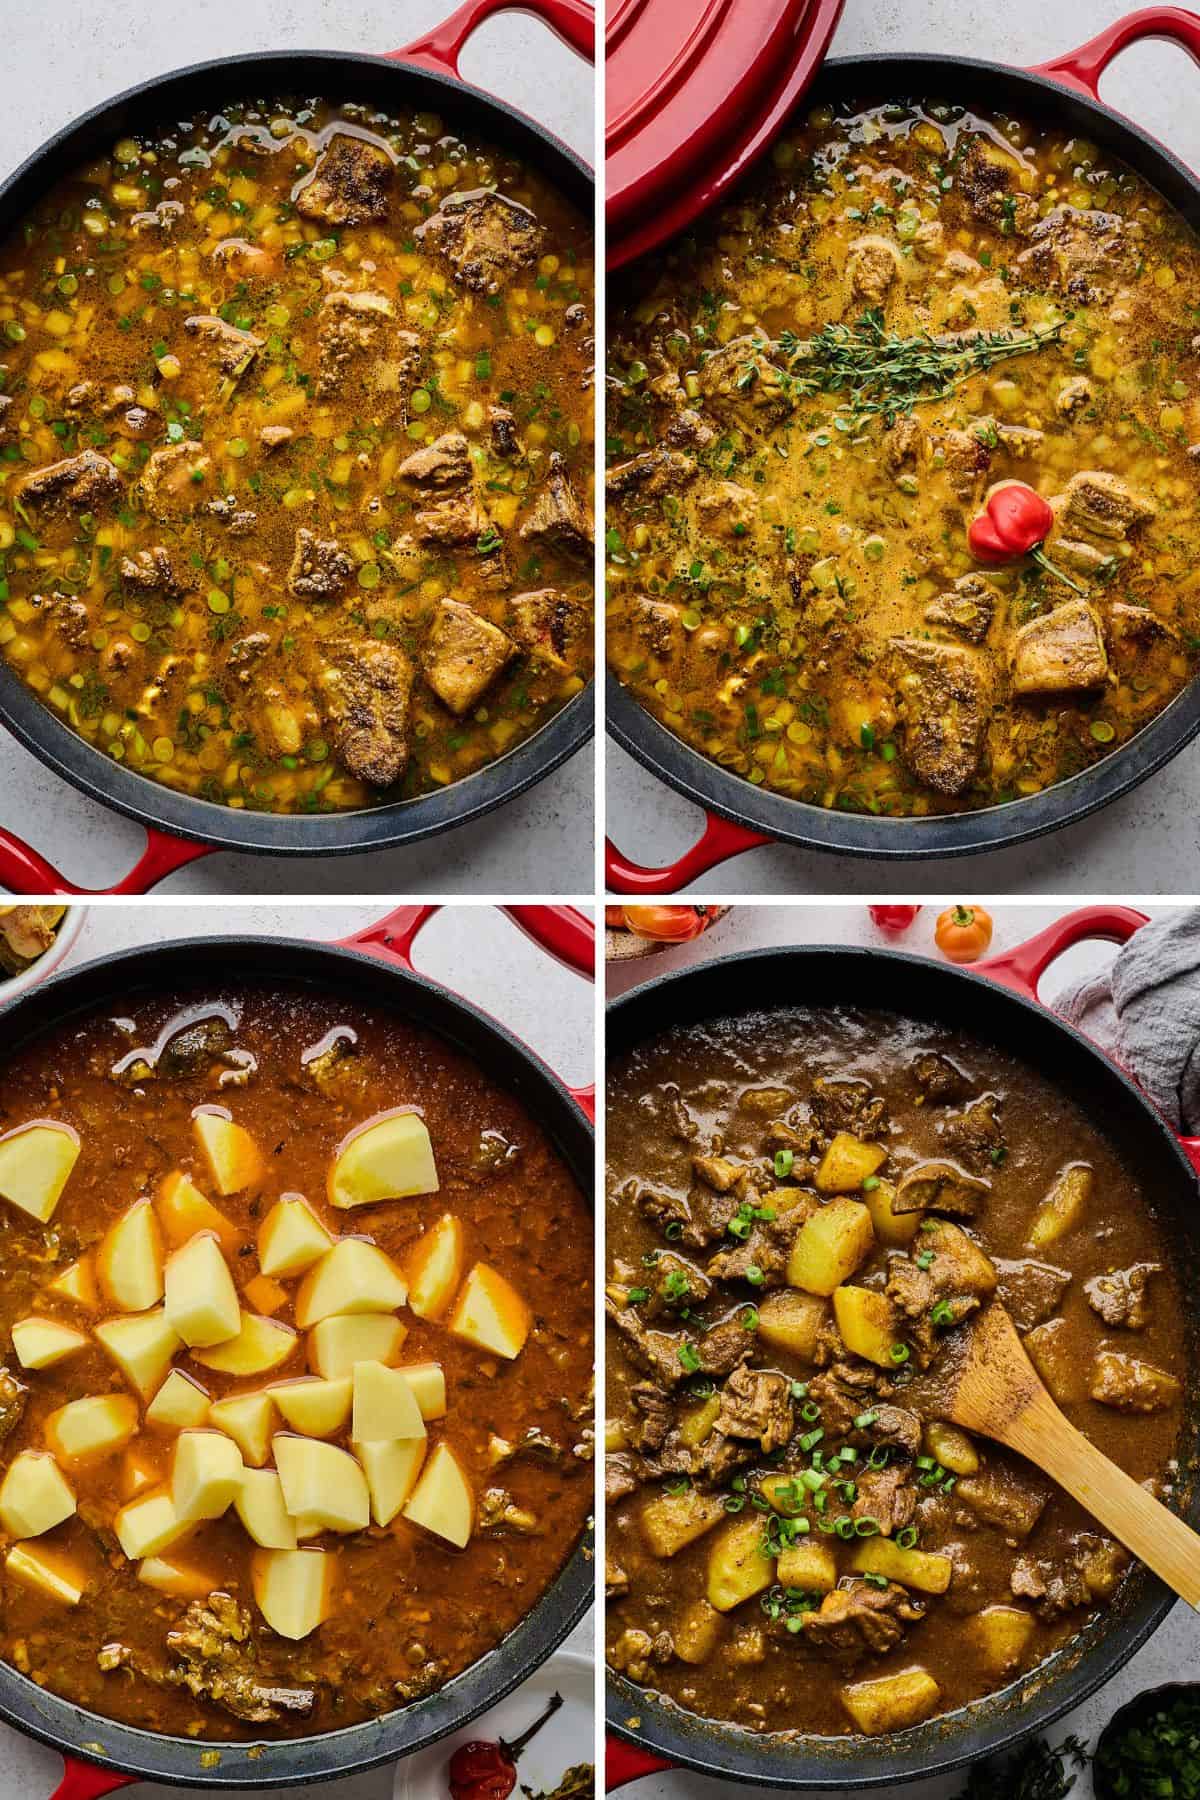 Collage of steps to make curry goat including adding the cooked meat to the stew mixture, adding herbs and a pepper, adding the potatoes, and finishing cooking the stew